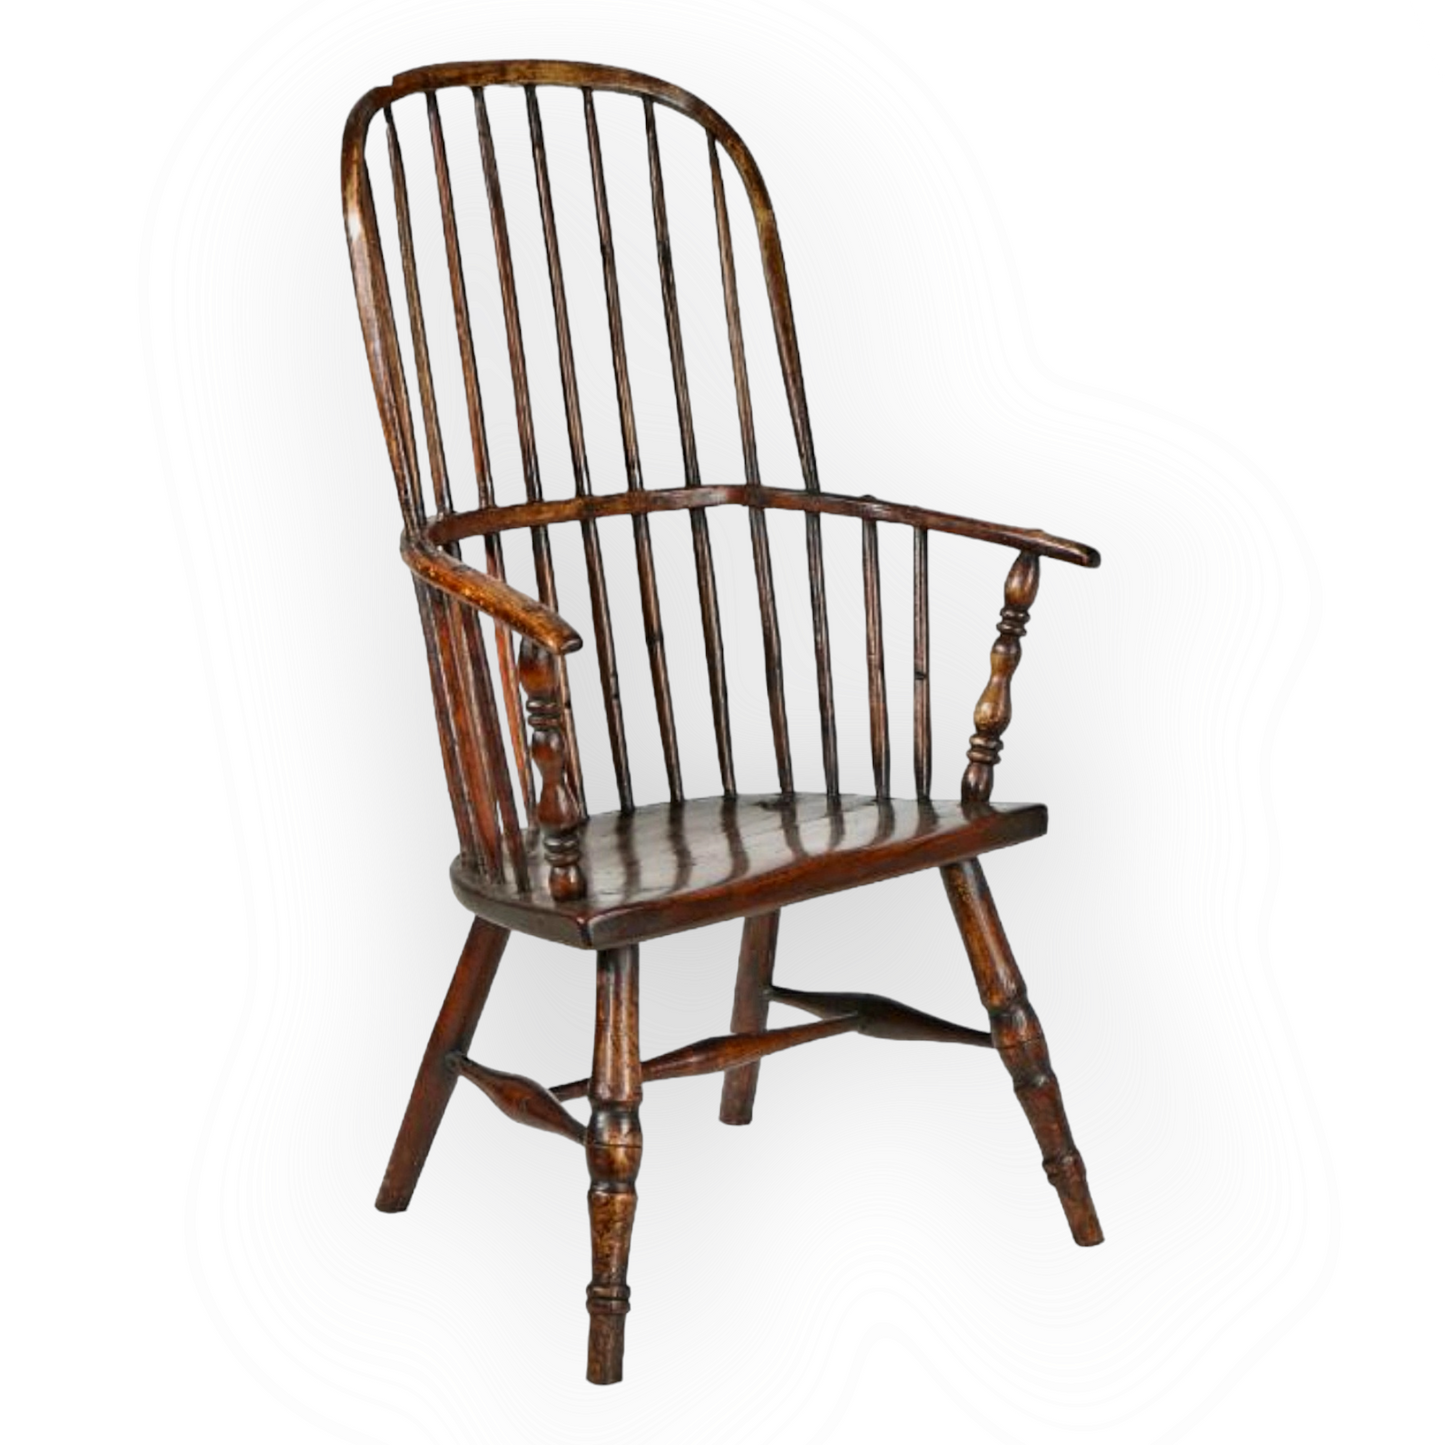 An Early 19th Century George III Period English Antique Ash & Elm Bow Back Windsor Armchair